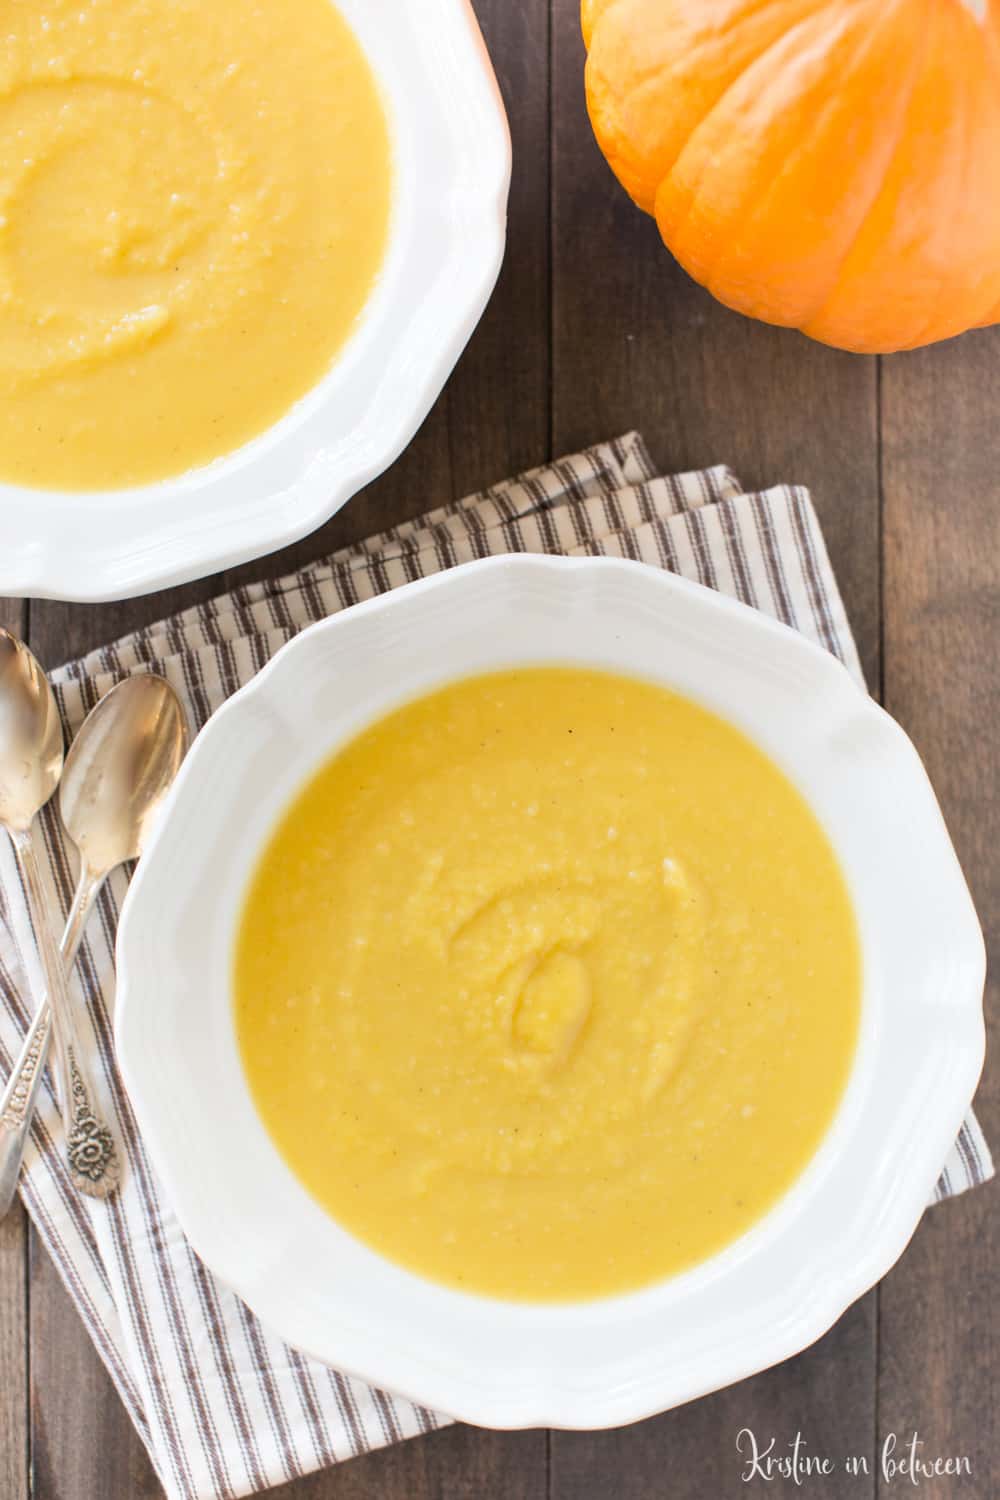 Fall is in the air! It's time for some classic pumpkin soup made with real ingredients!